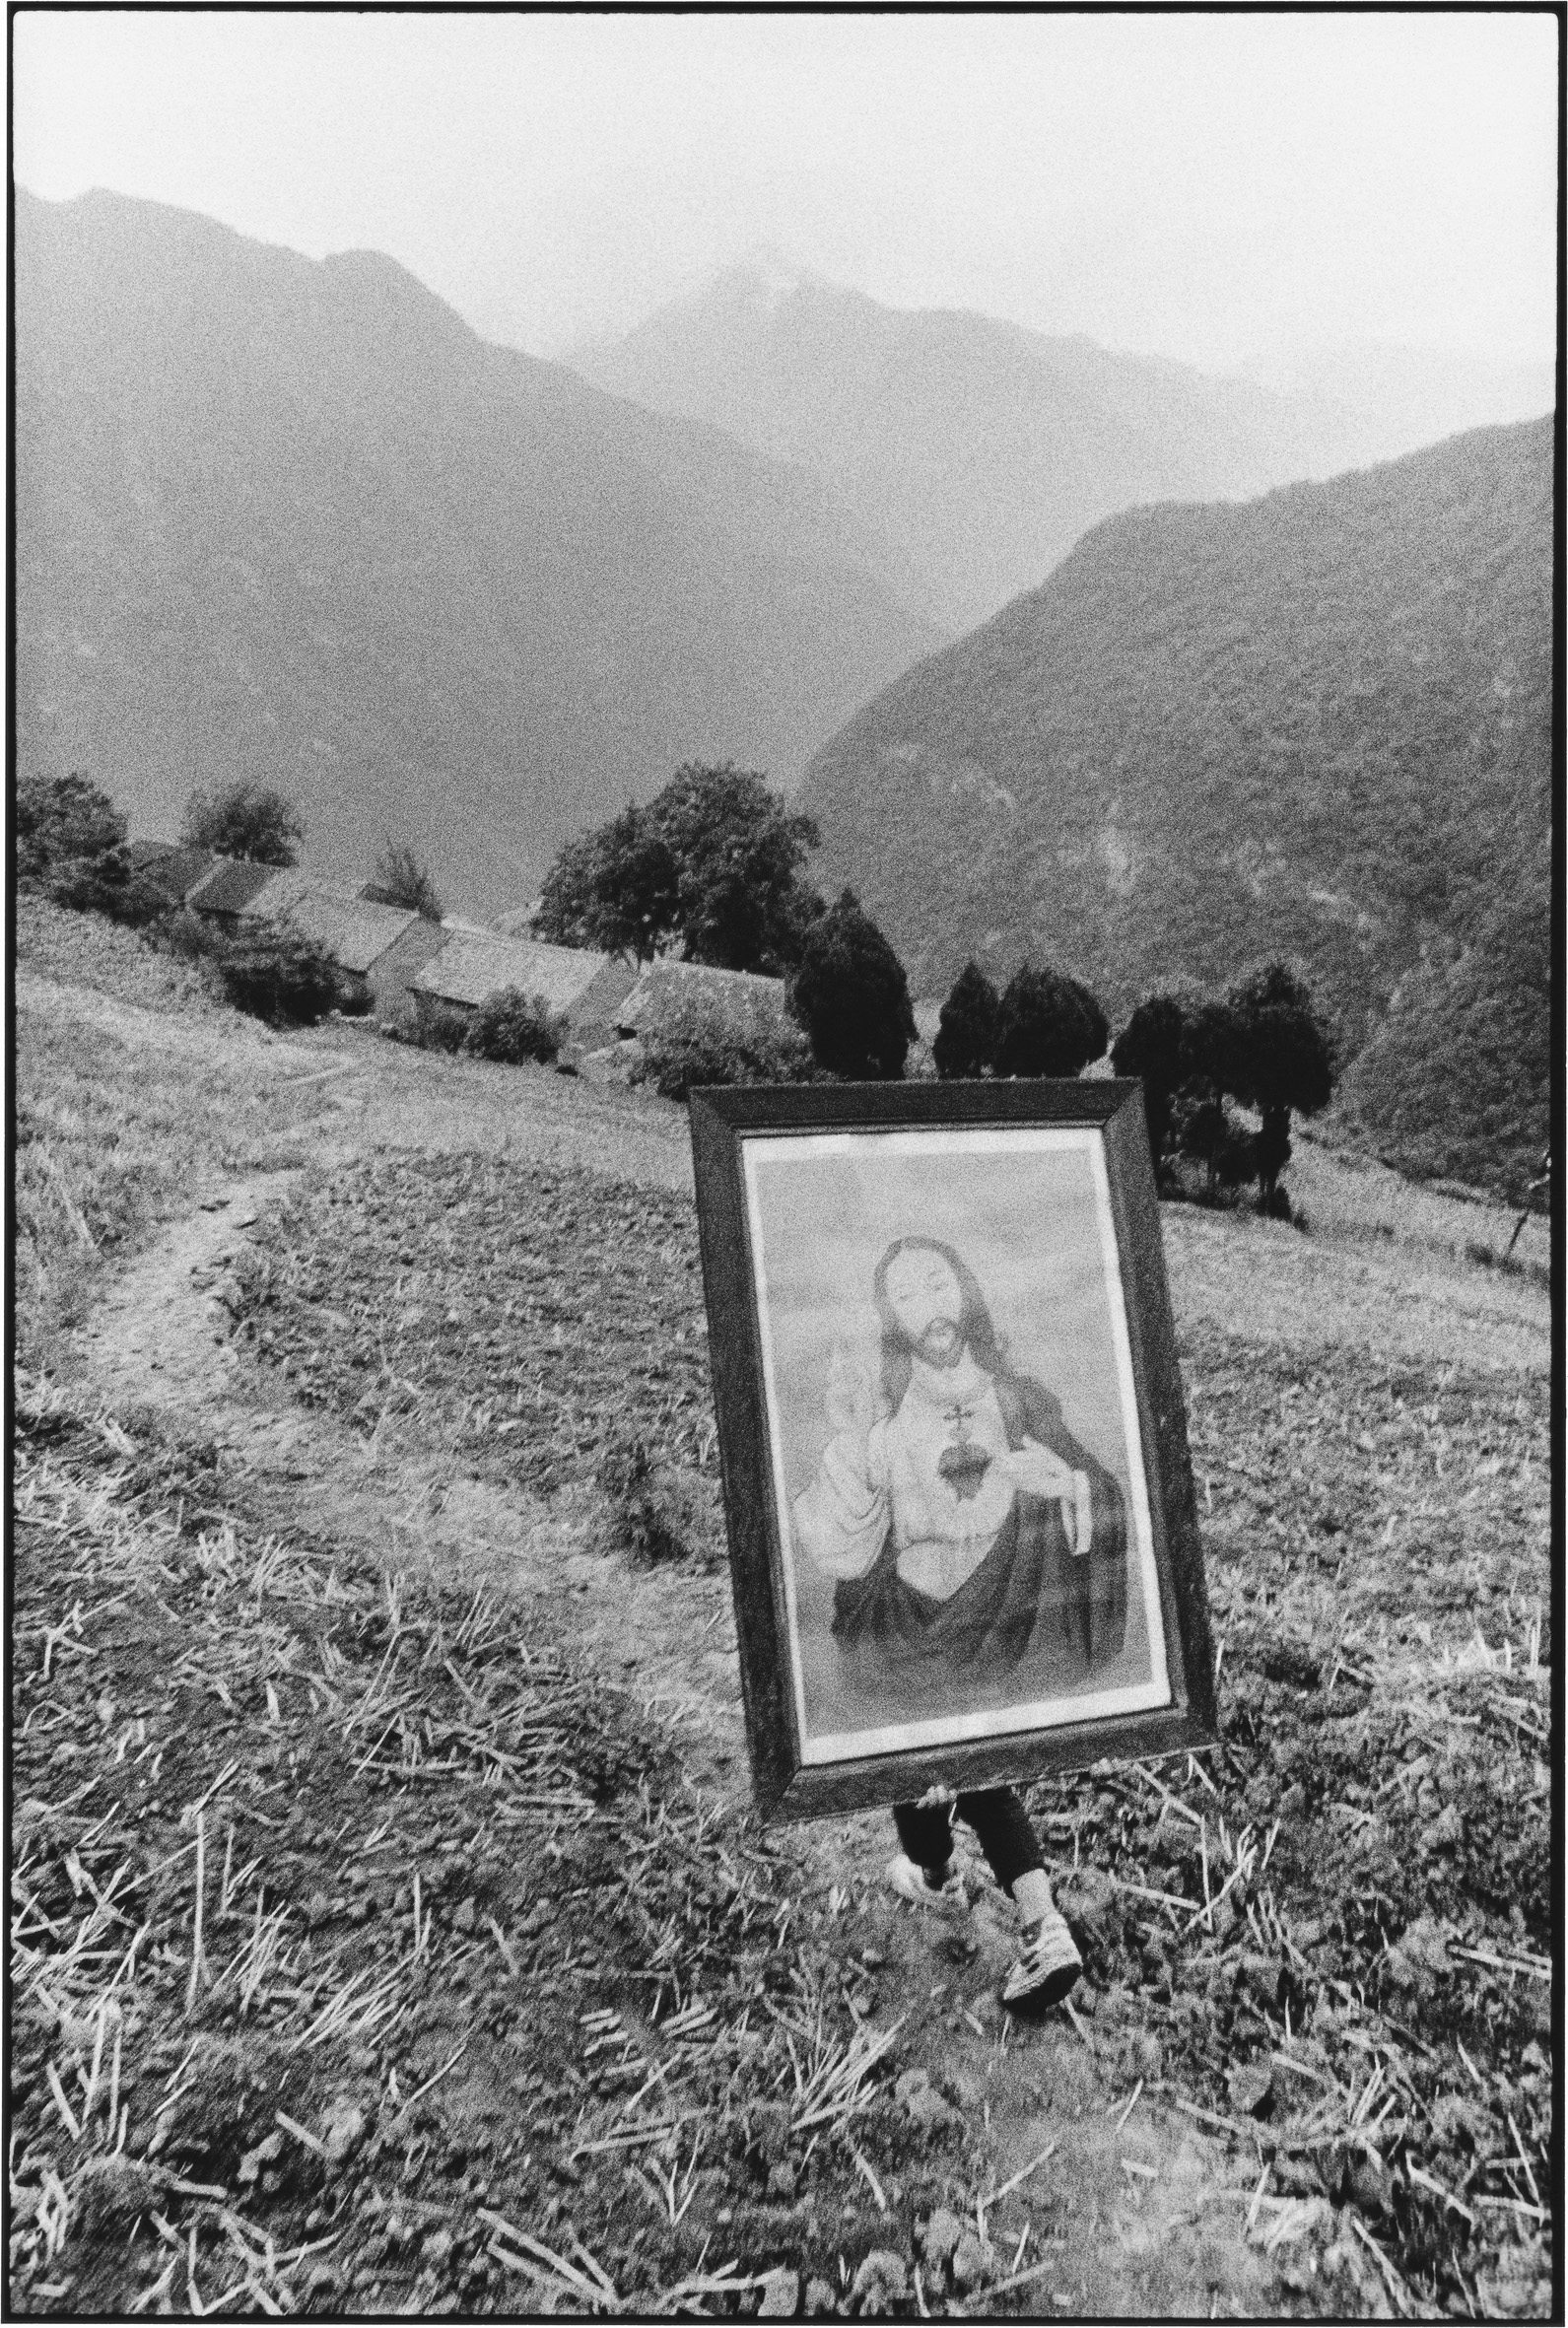 A Youth Carrying an Image of Jesus, Shaanxi, China